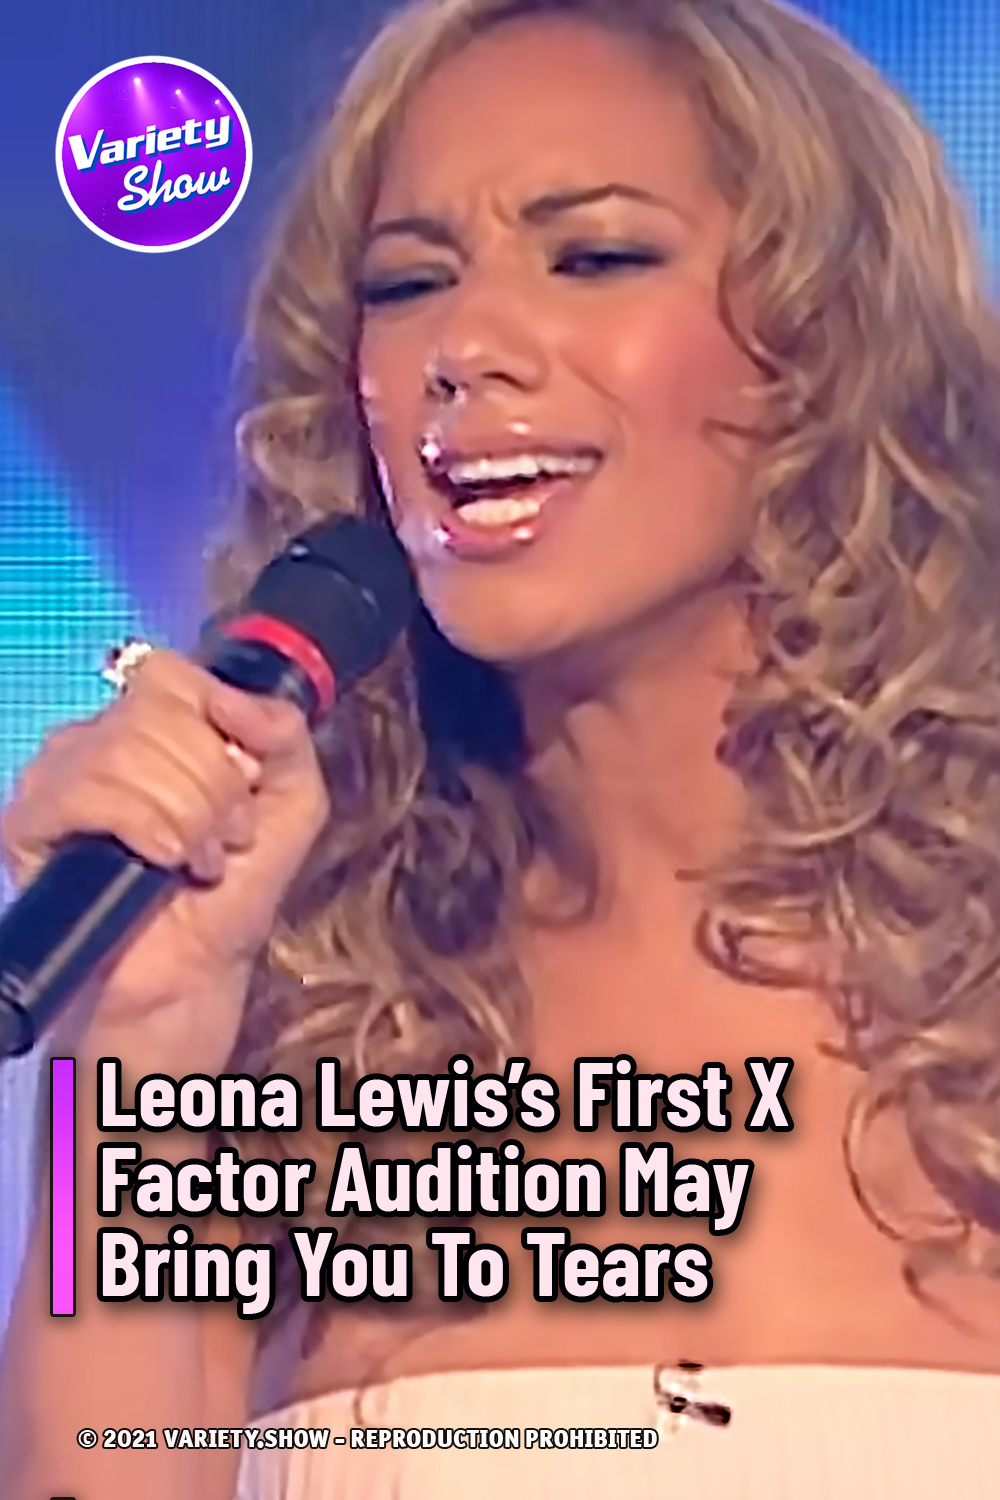 Leona Lewis’s First X Factor Audition May Bring You To Tears